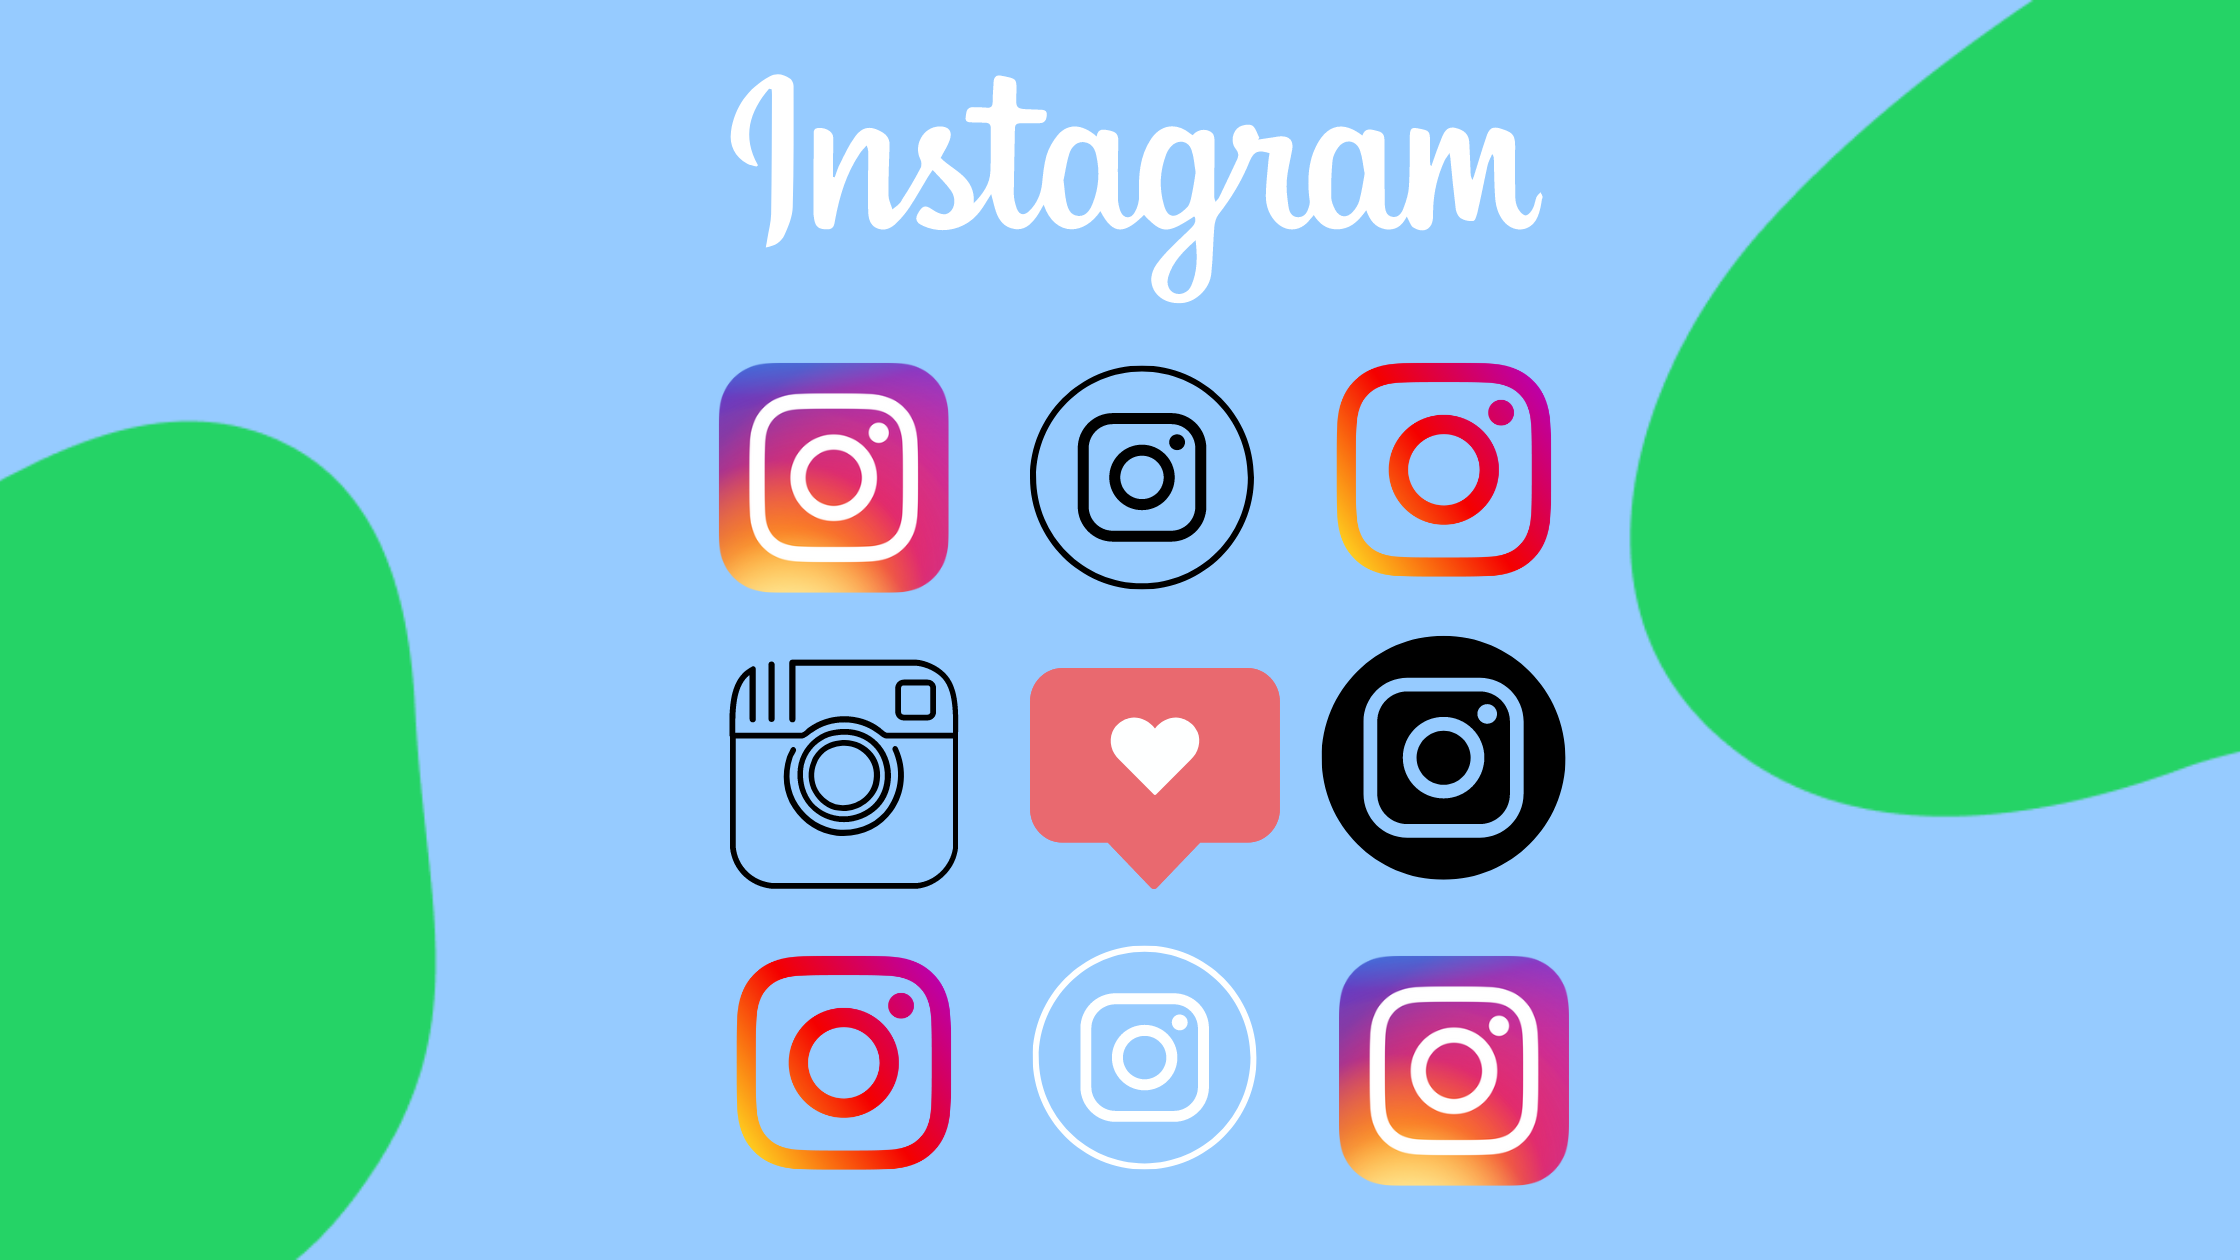 Instagram logos in 9 different colours